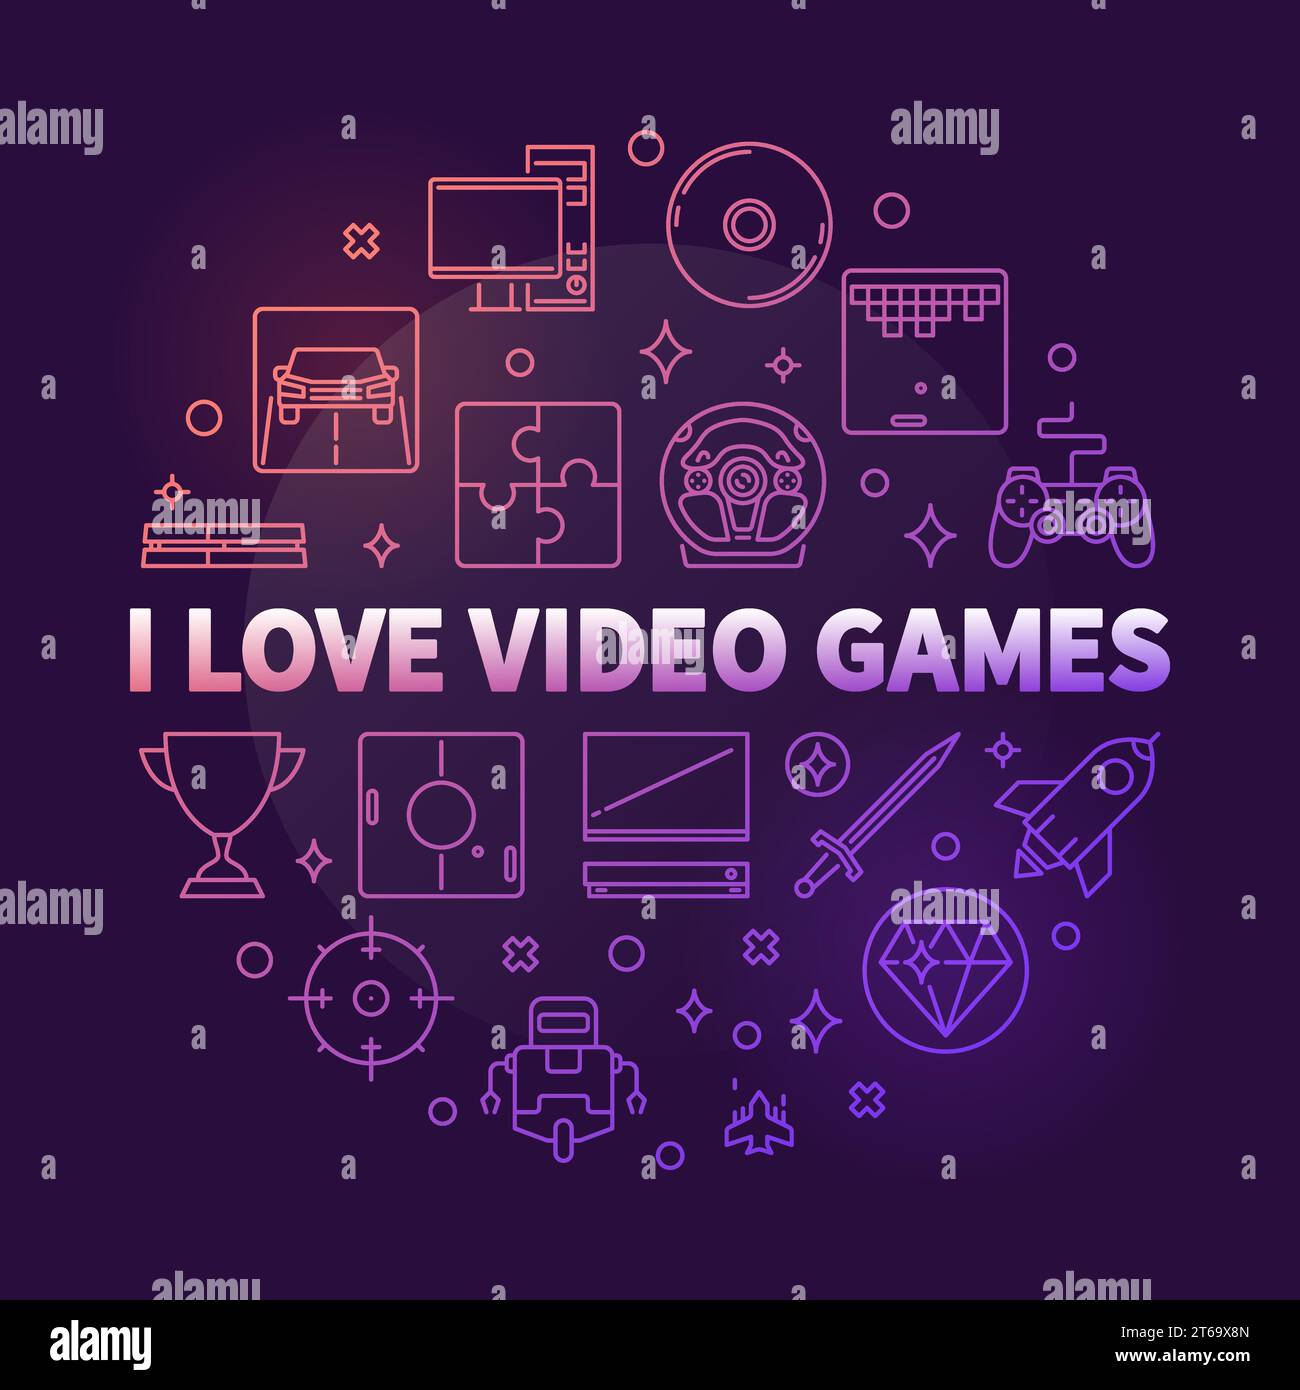 I Love Video Games vector round colorful outline illustration on dark background Stock Vector